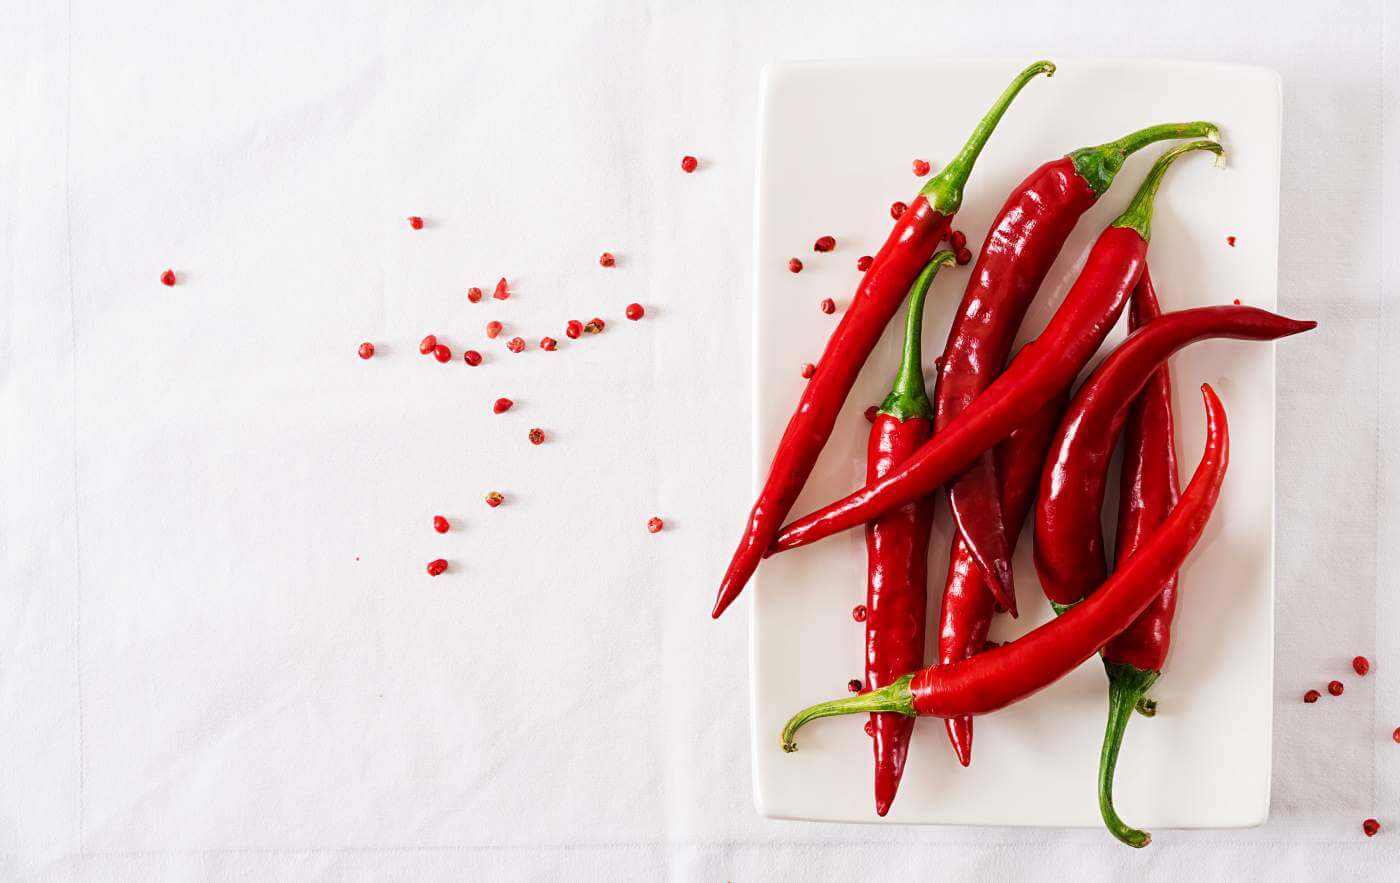 Red hot chili peppers in plate on white table